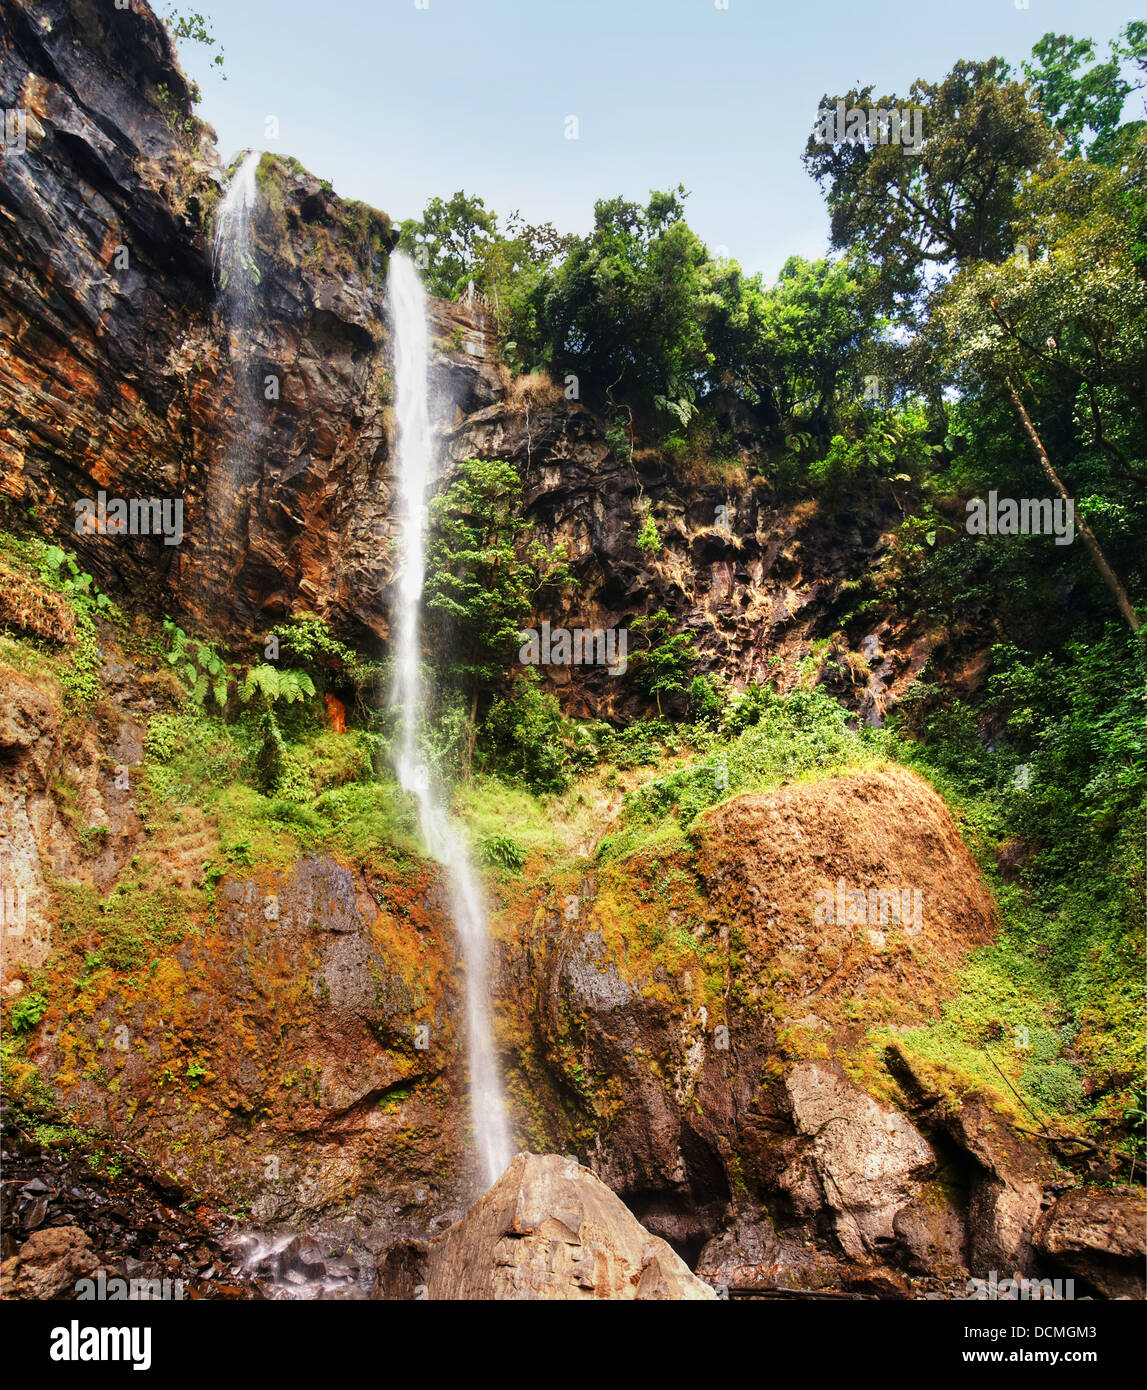 Sacred waterfall in a deep canyon of tropical forest Stock Photo